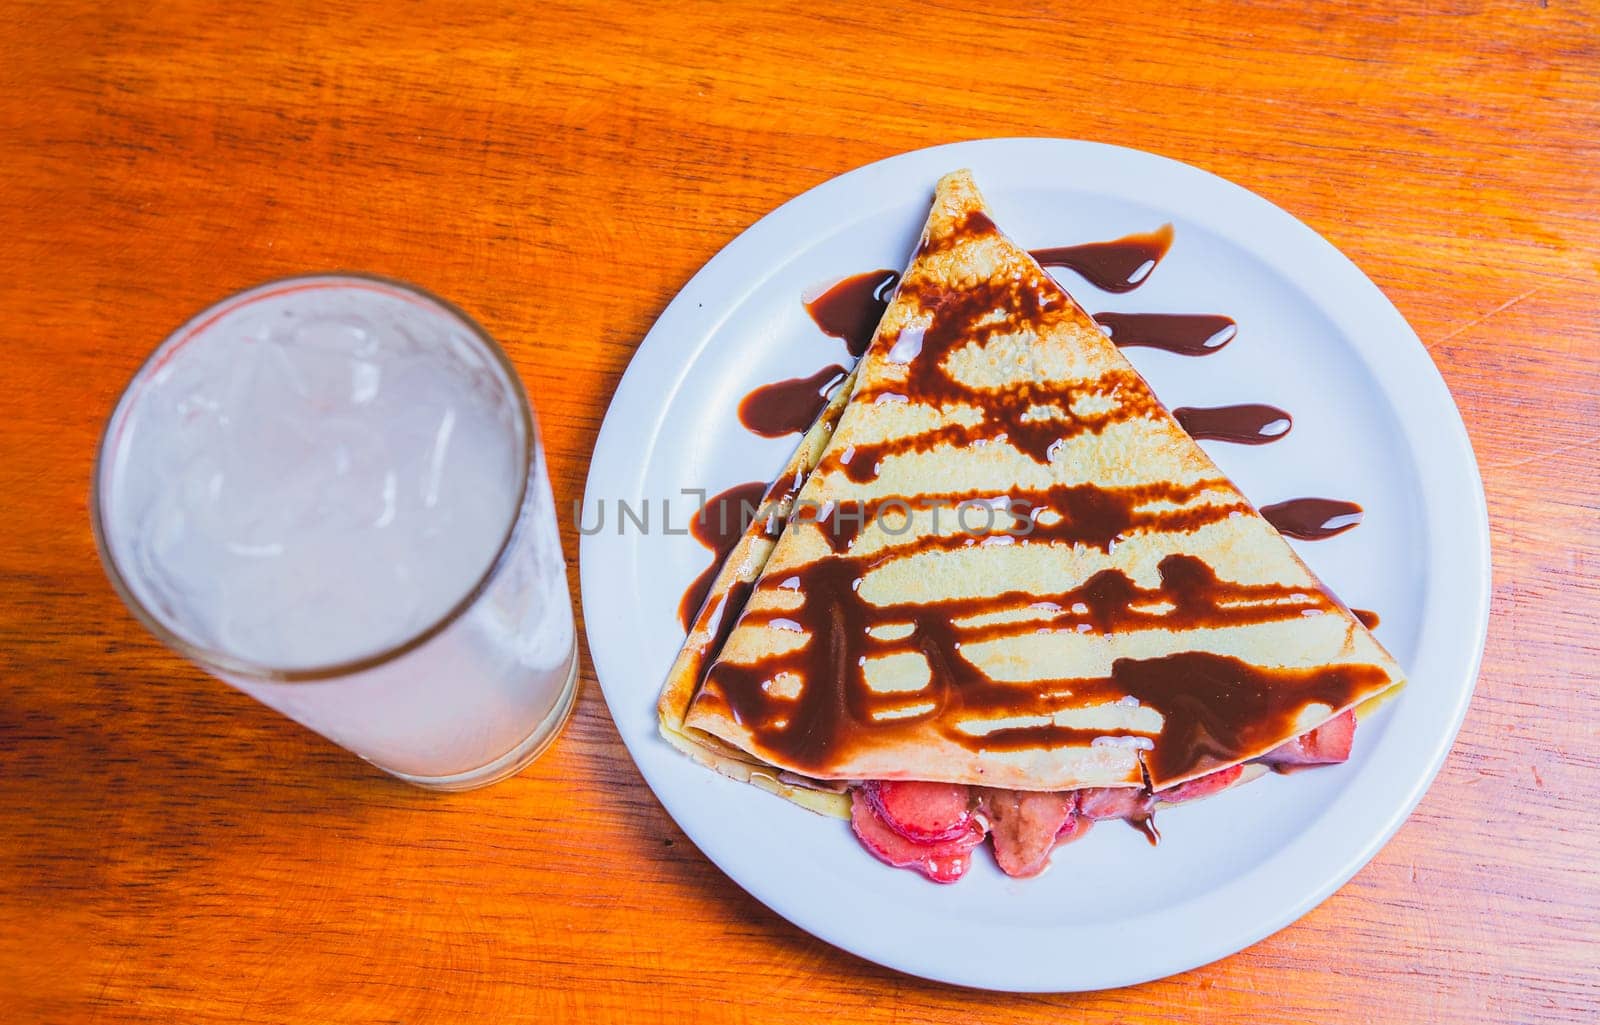 Crepe with chocolate cream and strawberry with drink on the table. Sweet strawberry crepe with chocolate cream and lemonade on table